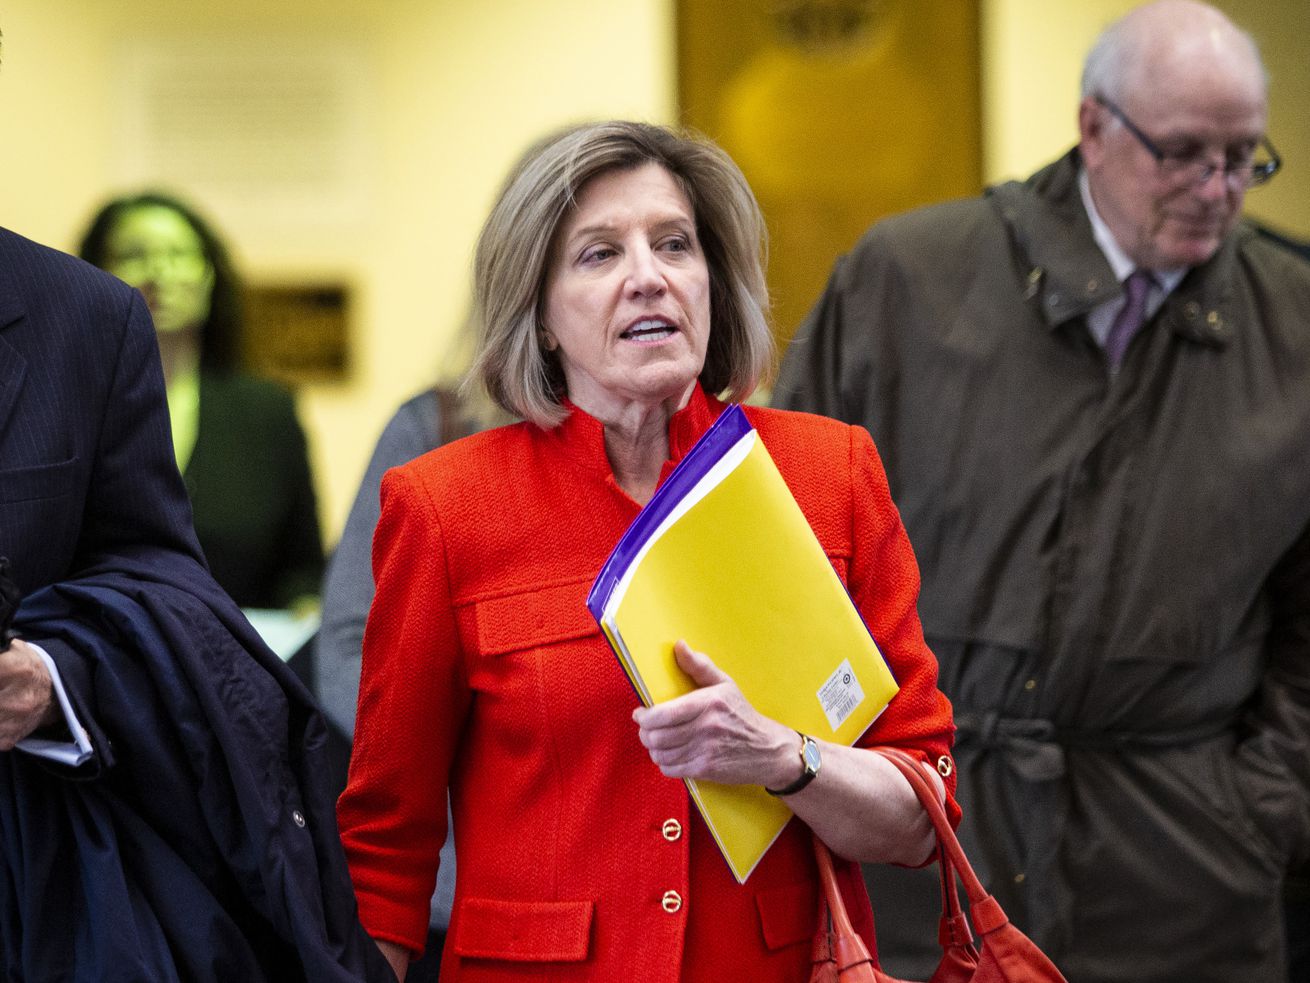 Former State Appeals Court Judge Sheila O’Brien walks out of the Leighton Criminal Courthouse in Chicago.